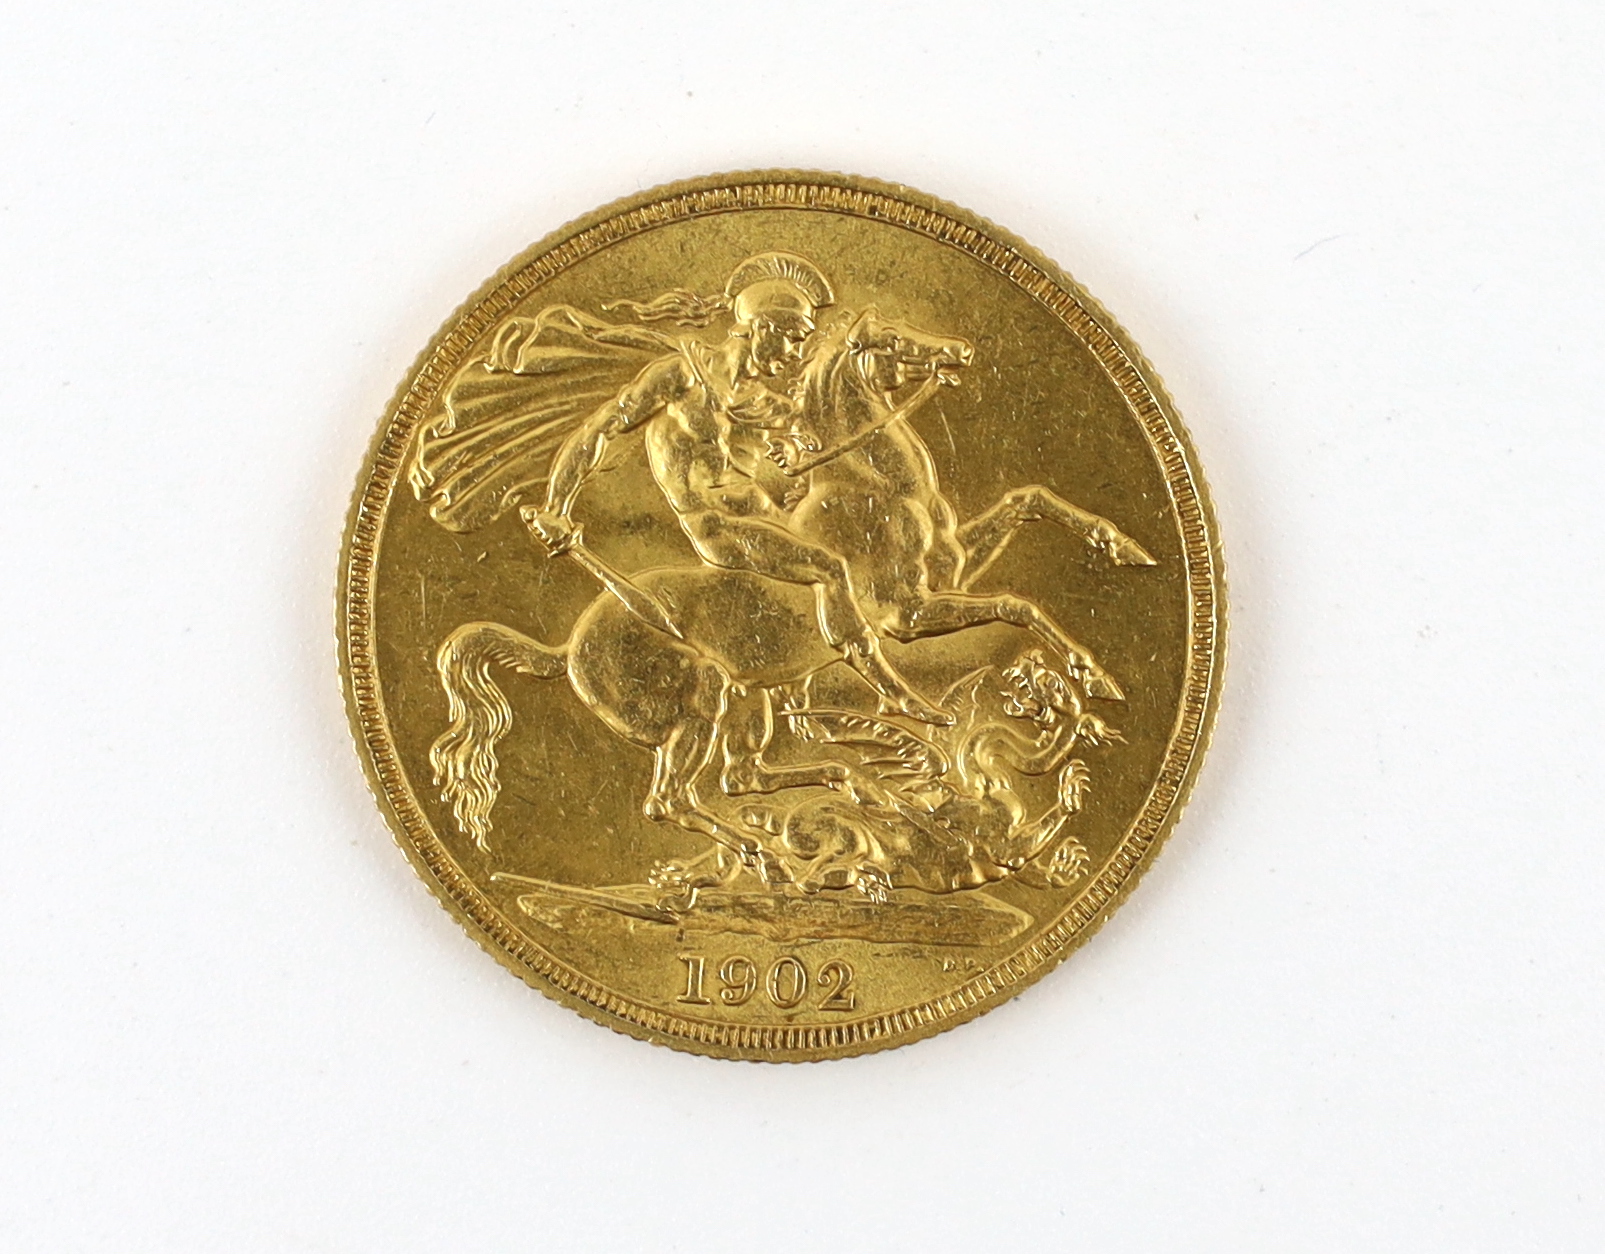 British Gold Coins, Edward VII two pounds, 1902, near UNC (S3967)